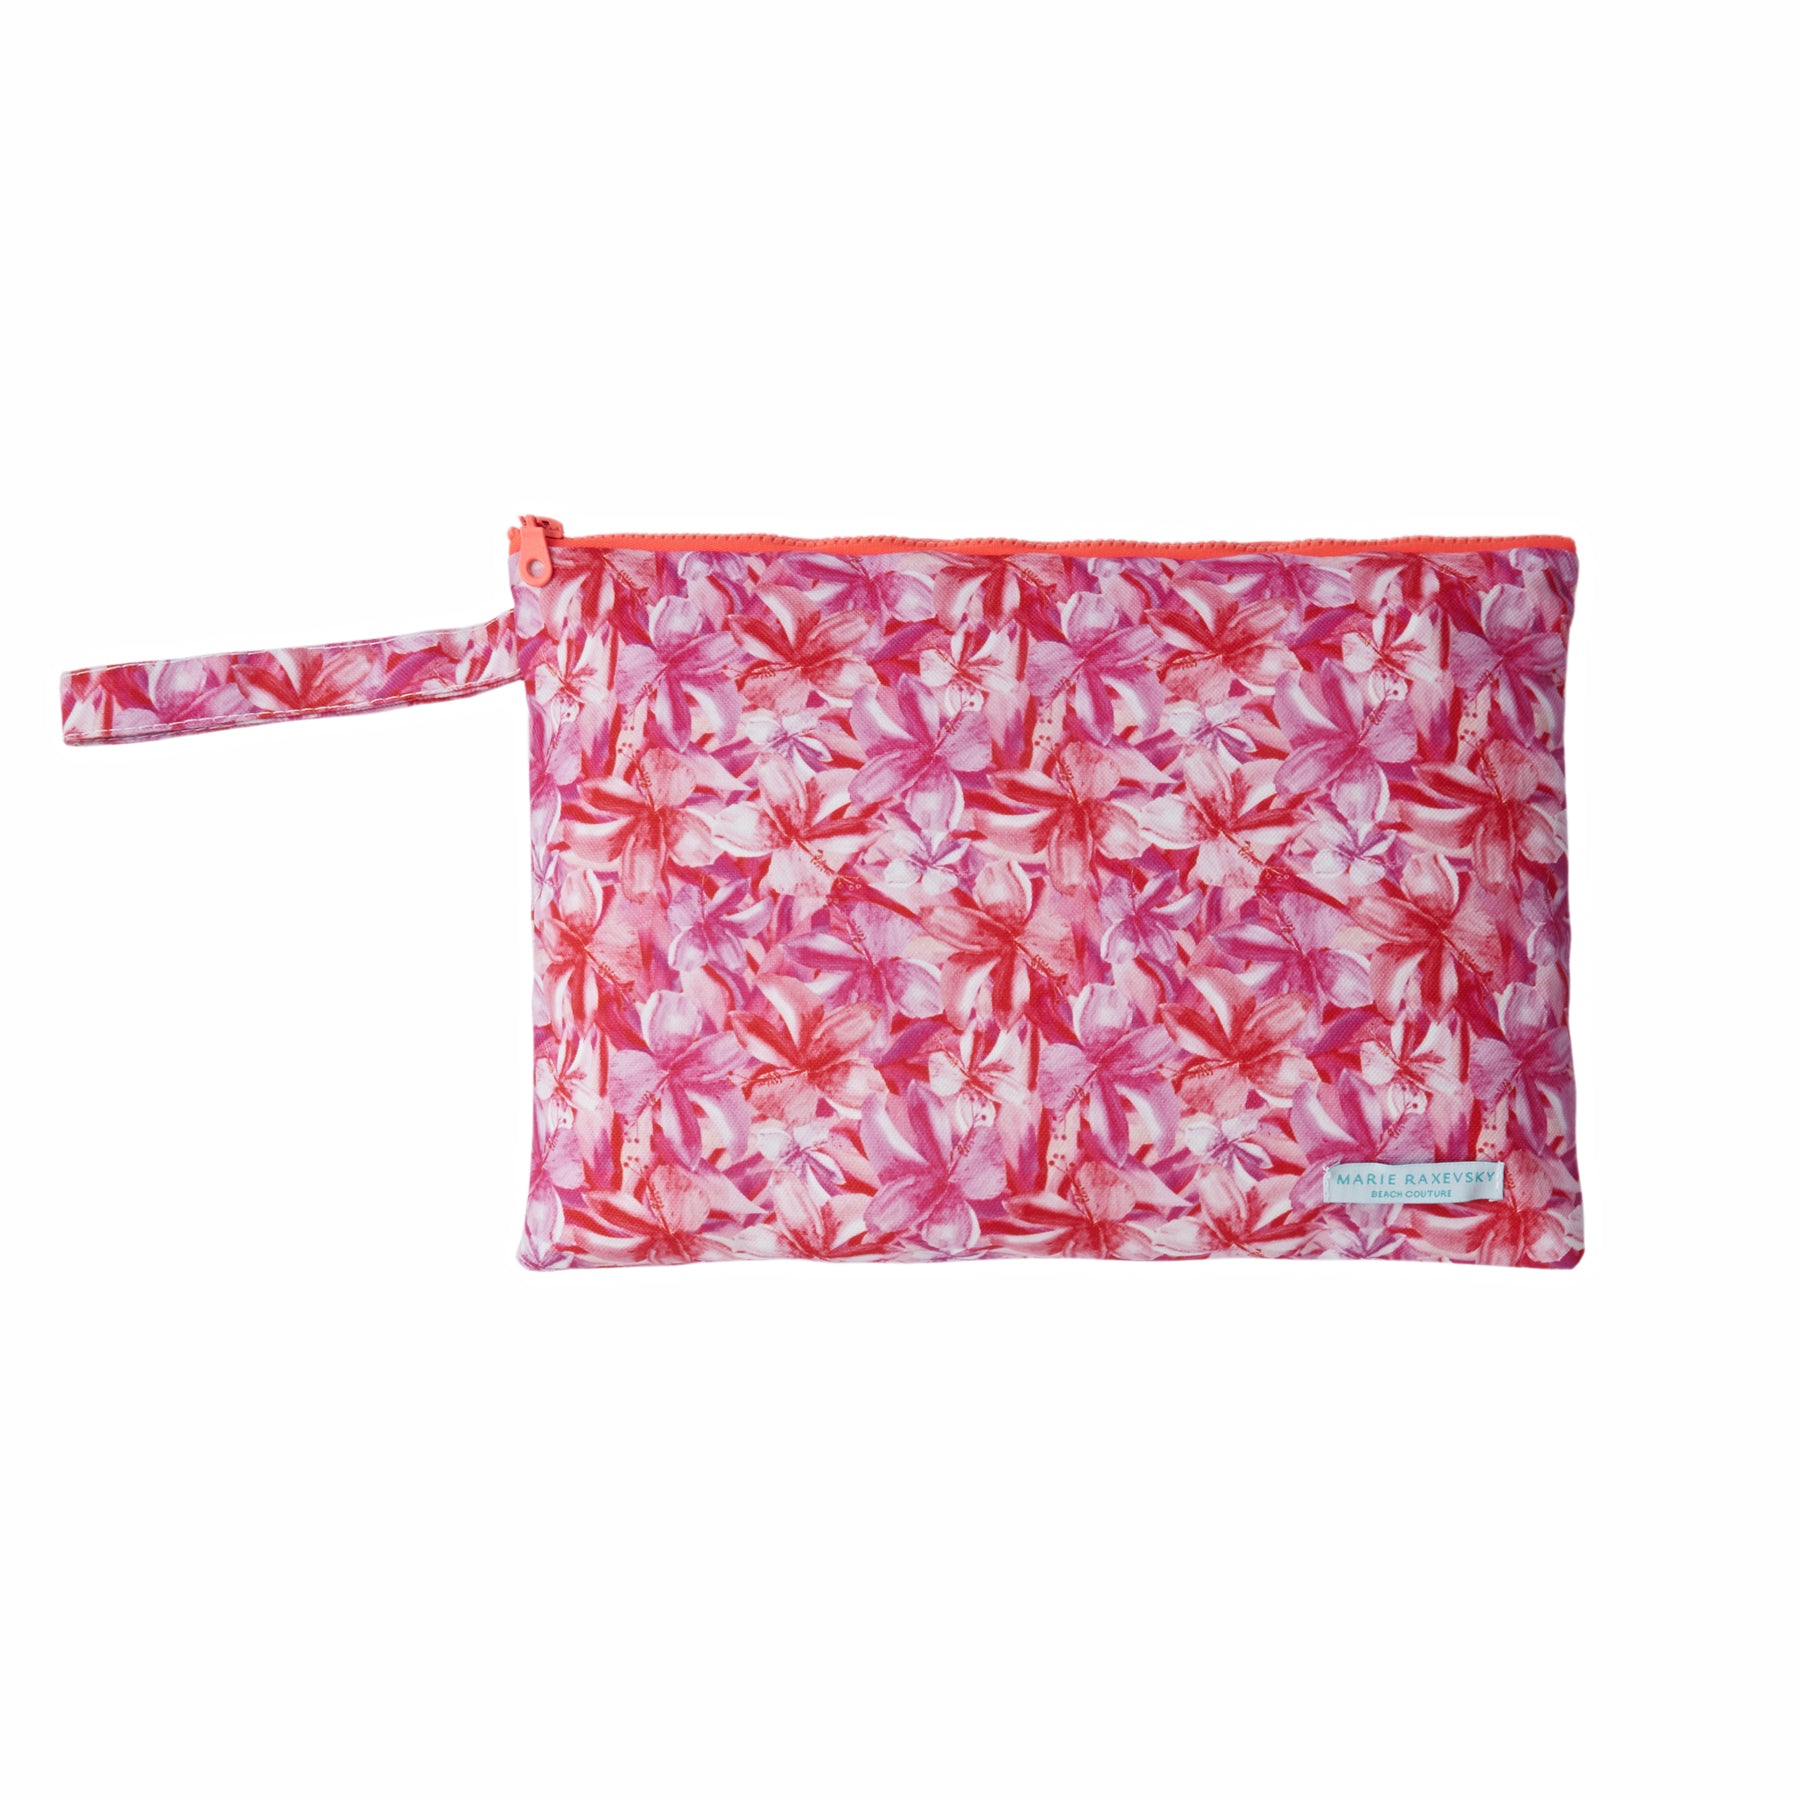 POUCH LARGE HIBISCUS